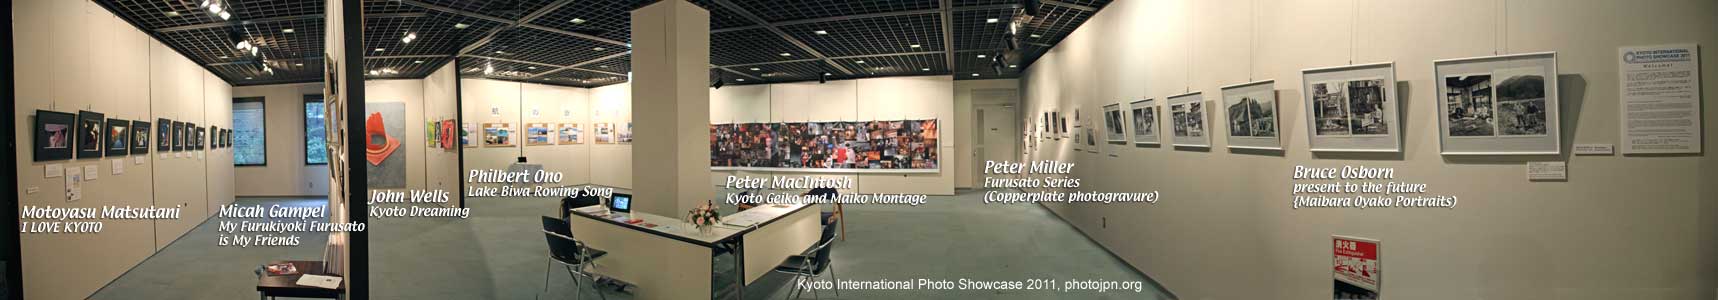 The 2nd floor has the Sister Cities Exhibition Room where we held our group photo exhibition. This is a panorama shot of what our exhibition room looked like.
Keywords: kyoto international photo showcase 2011